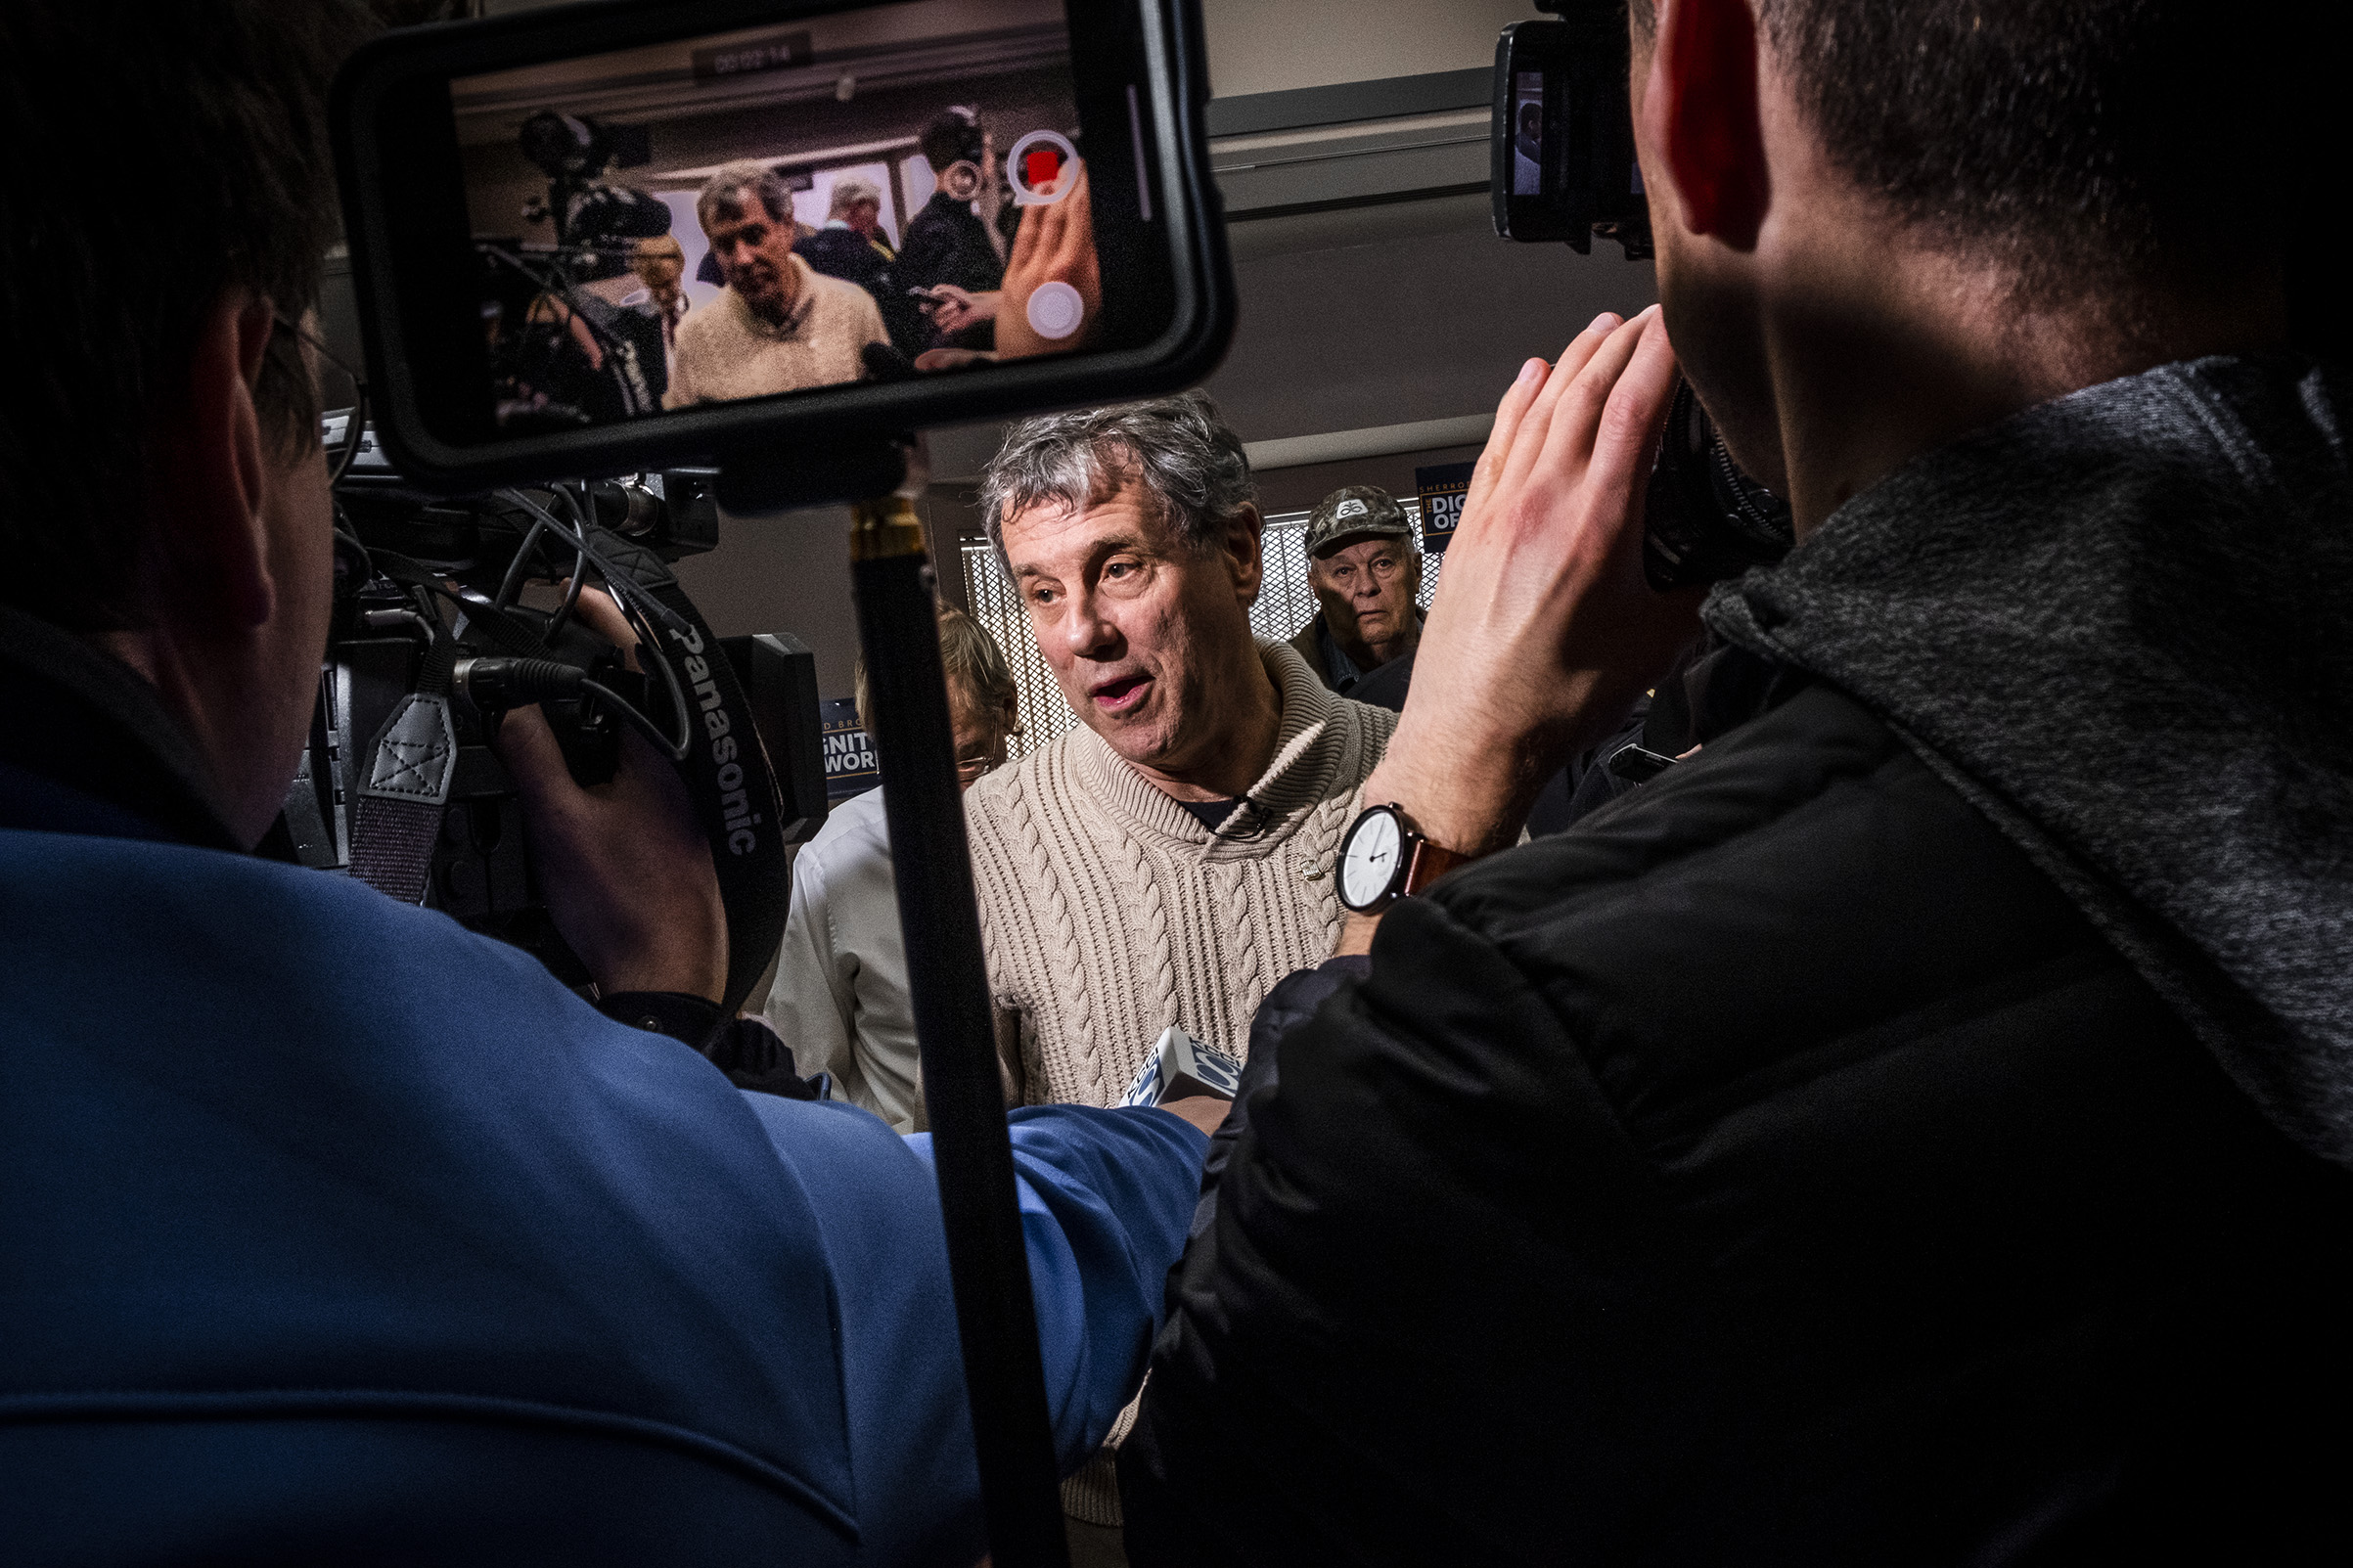 Ohio Sen. Sherrod Brown 
                      speaks to press during a roundtable with local farmers during his Dignity of Work tour, at
                      Perry Public Library in Perry, IA on Feb. 1, 2019. (Devin Yalkin for TIME)